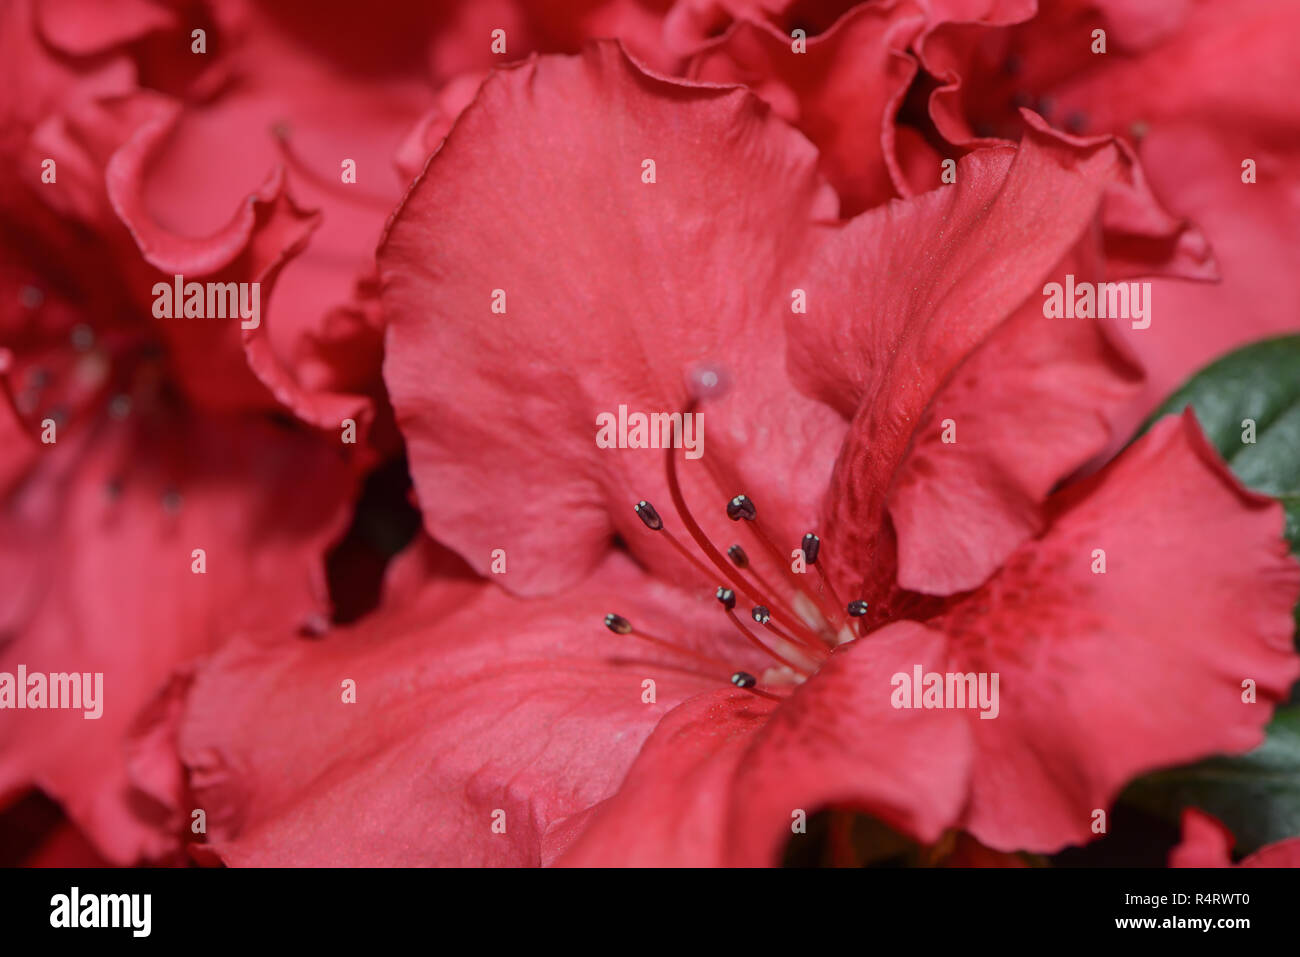 rhododendron flowers Stock Photo